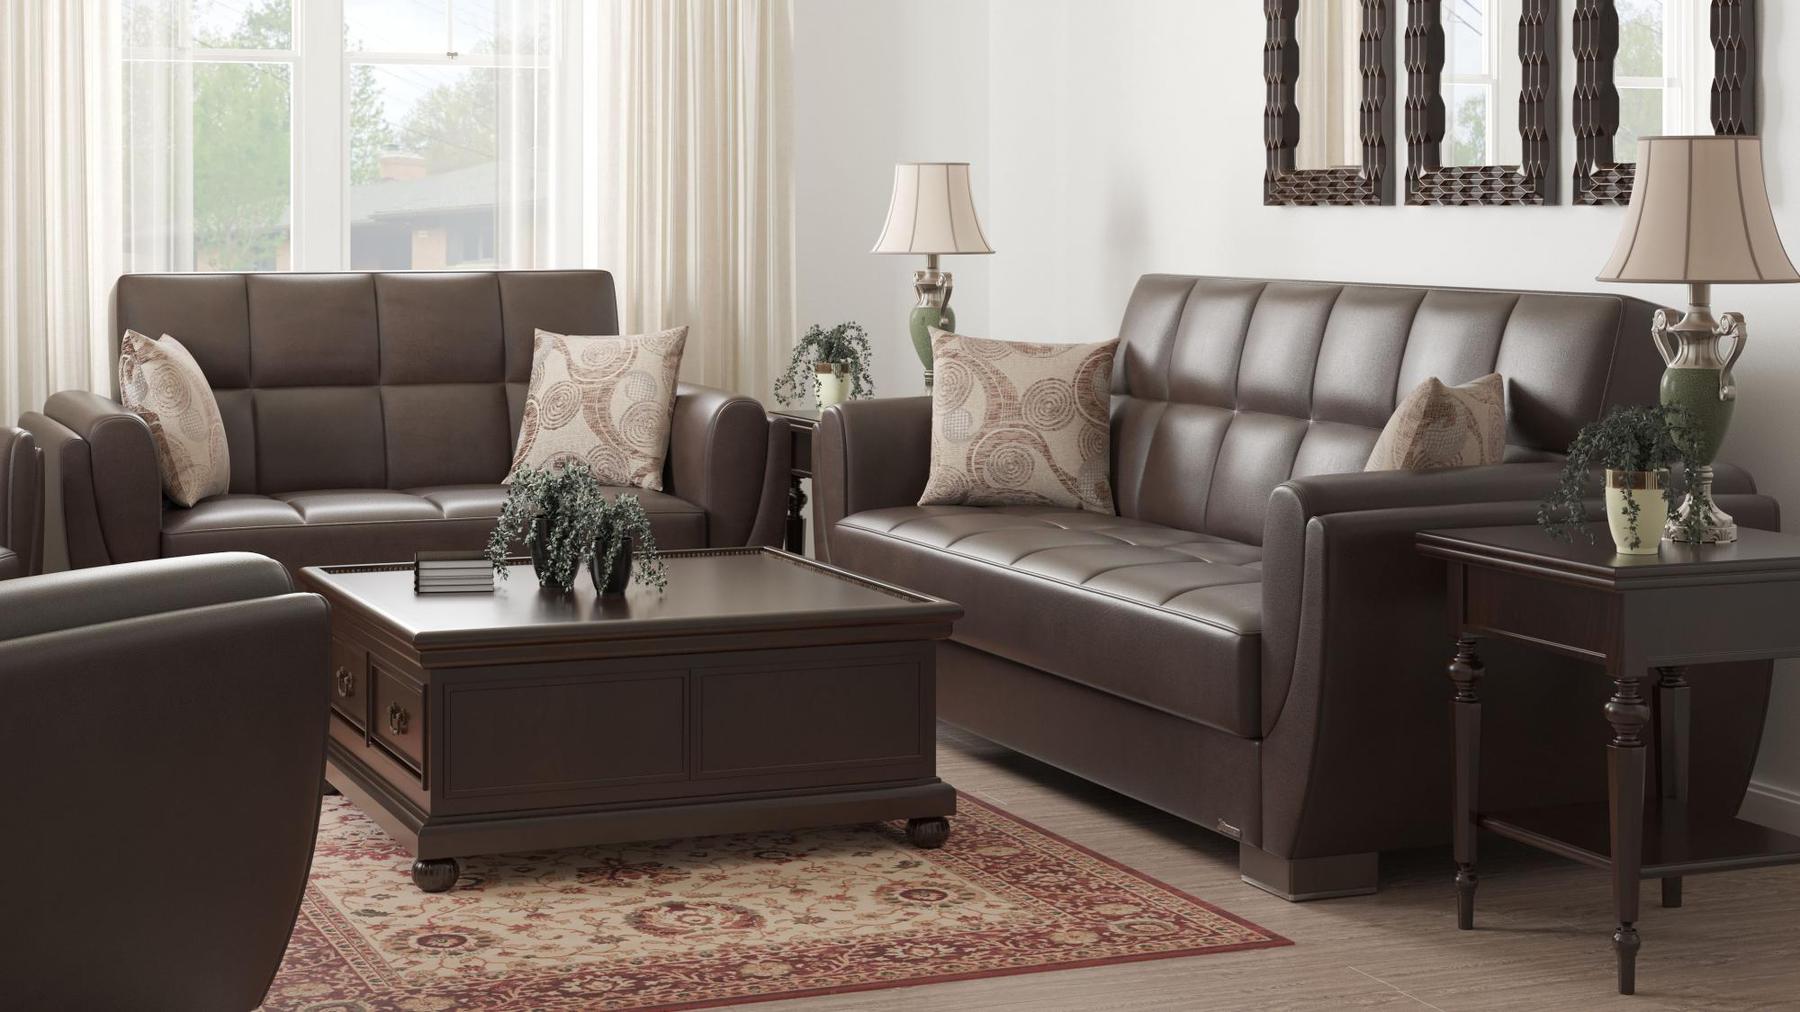 Modern design, Dark Brown , Artificial Leather upholstered convertible sleeper Loveseat with underseat storage from Voyage Shelter by Ottomanson in living room lifestyle setting with another piece of furniture. This Loveseat measures 71 inches width by 36 inches depth by 41 inches height.